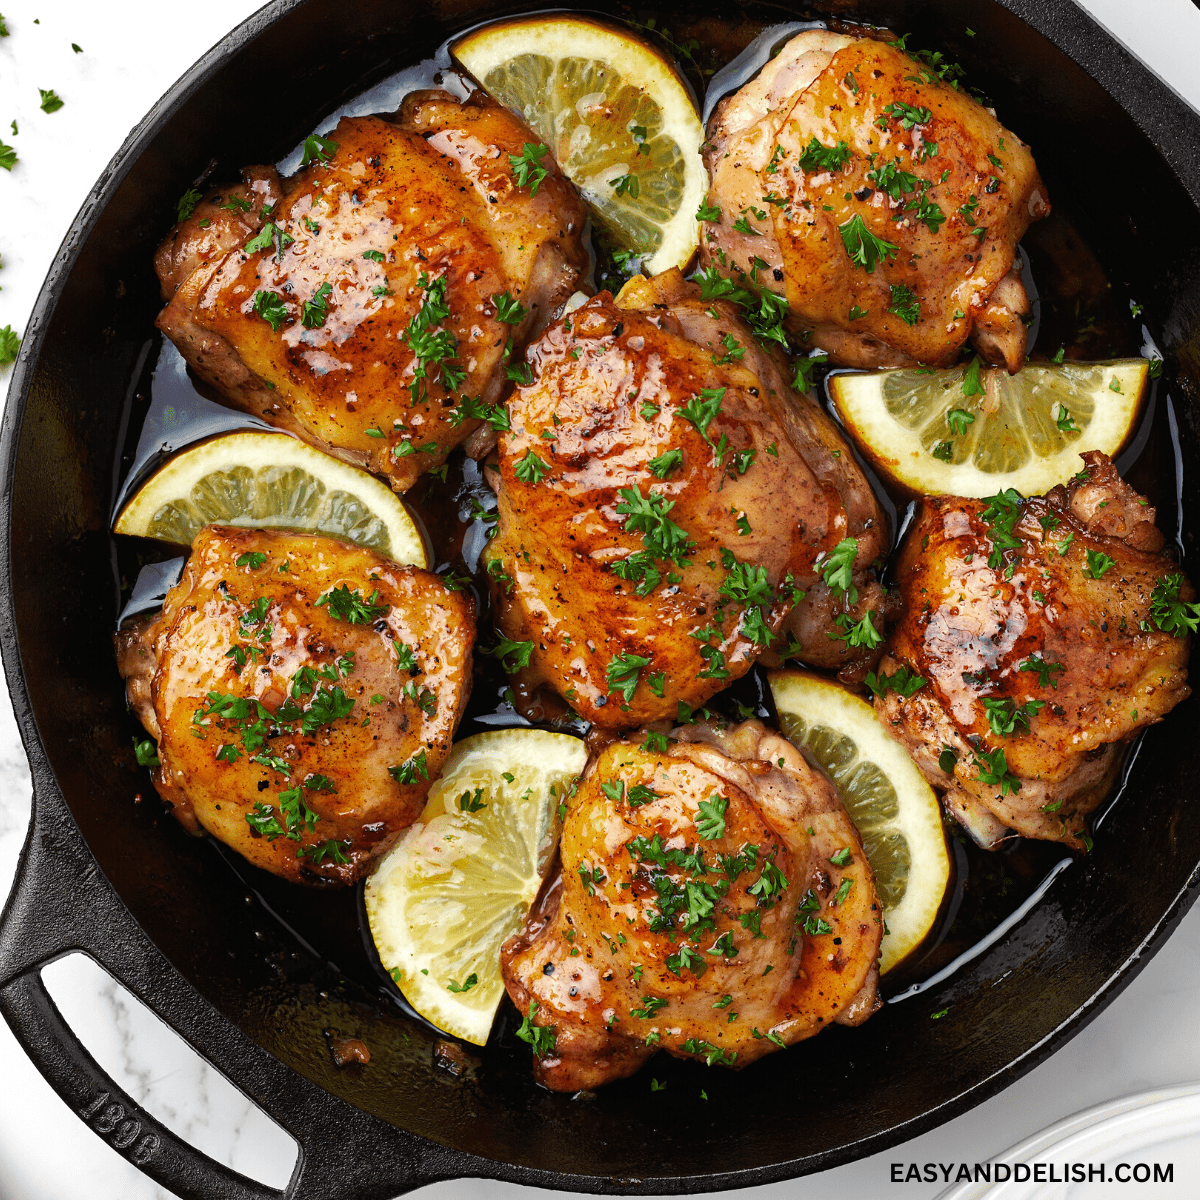 Honey-Butter-Grilled Chicken Thighs with Parsley Sauce Recipe